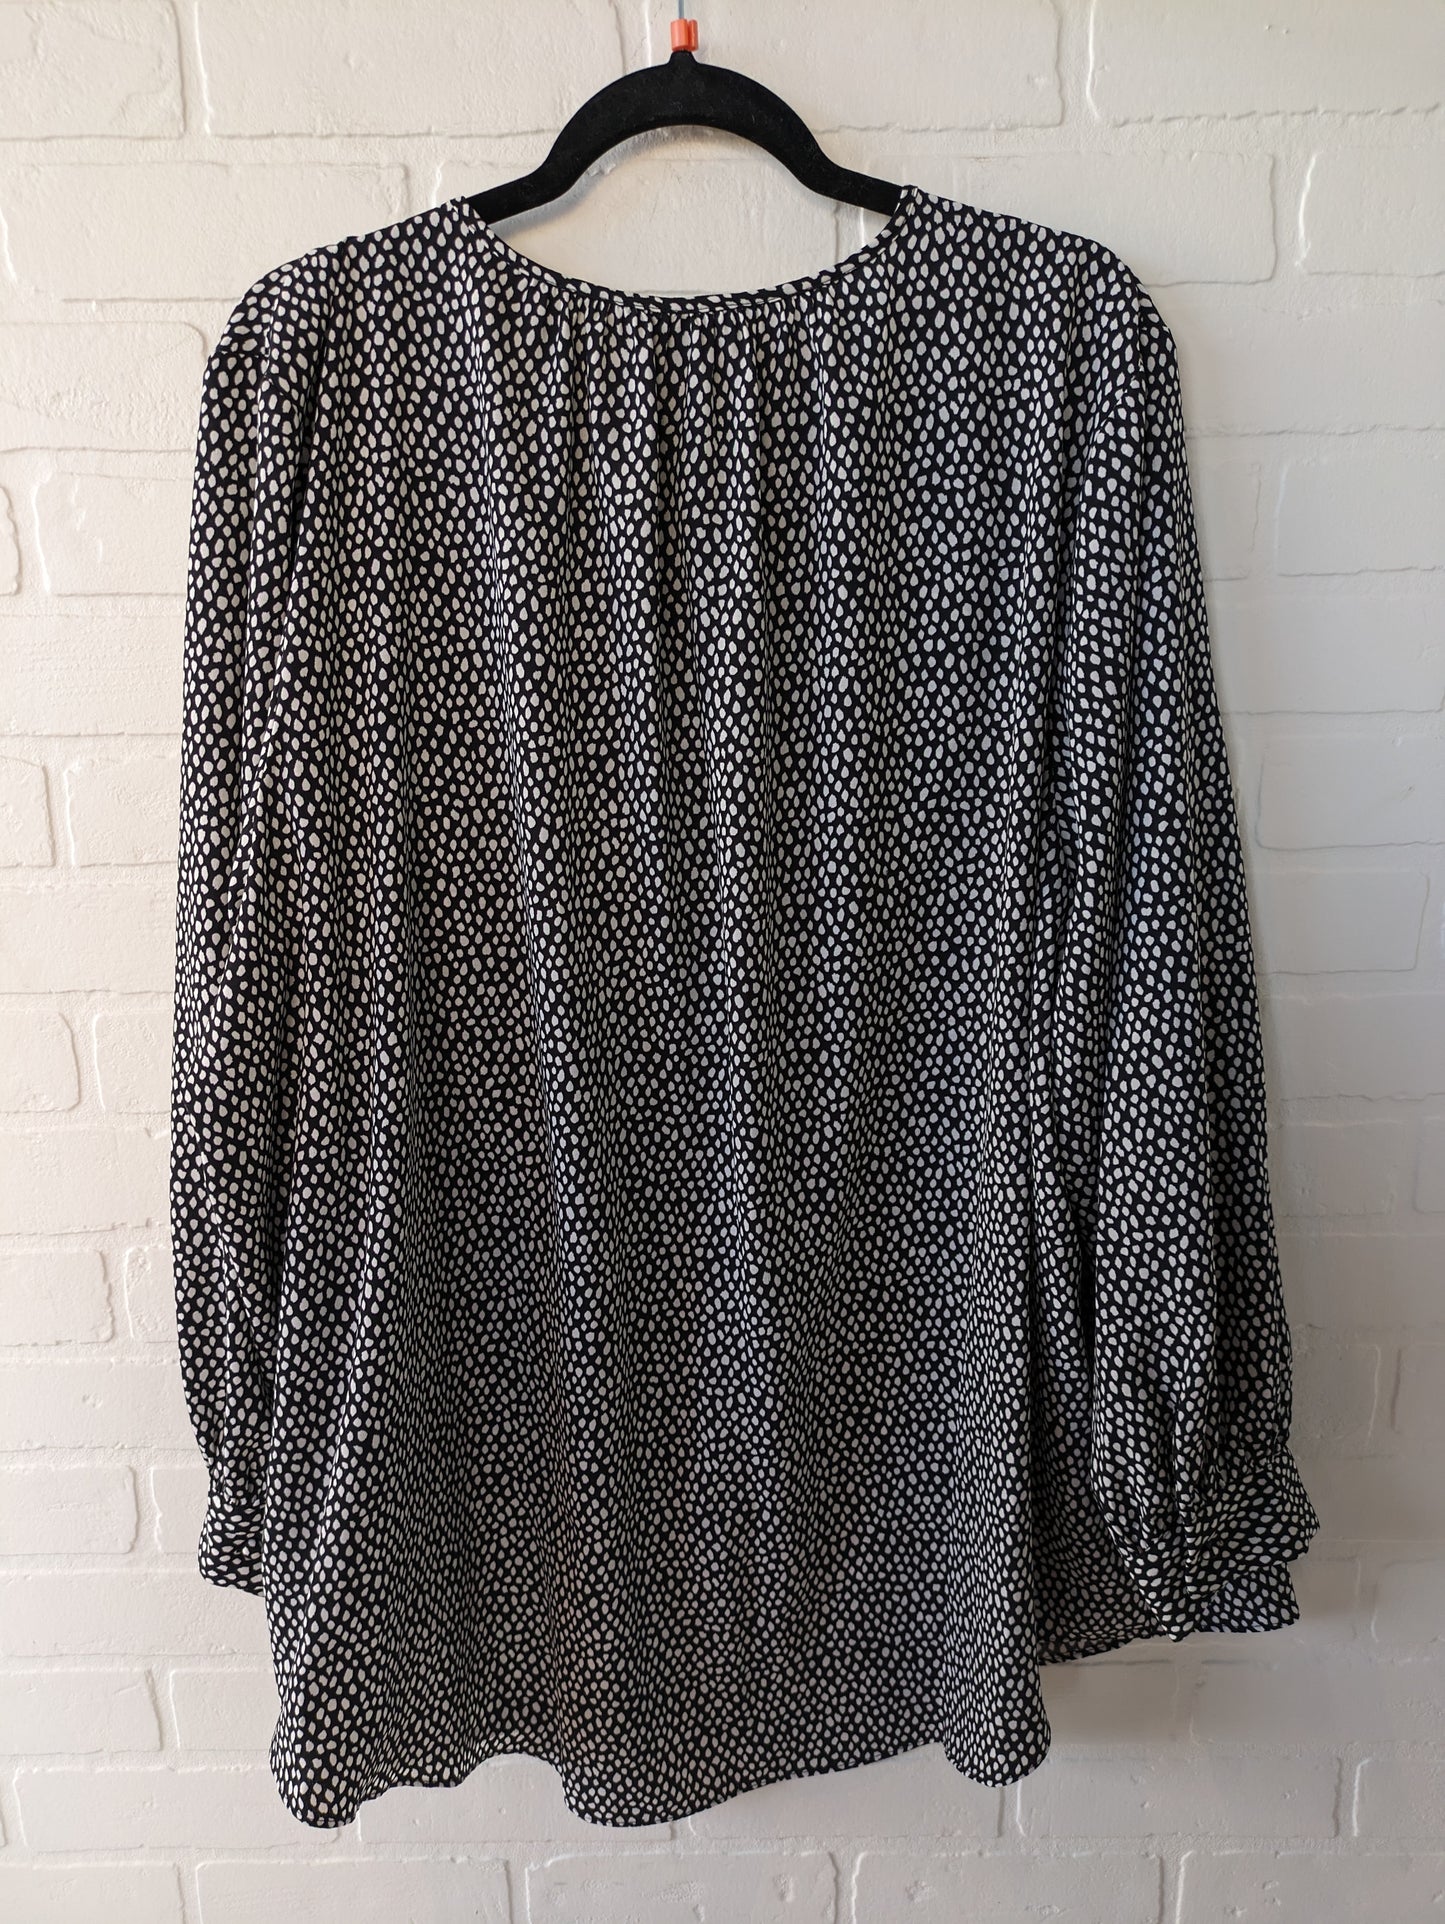 Top Long Sleeve By Nine West  Size: 4x